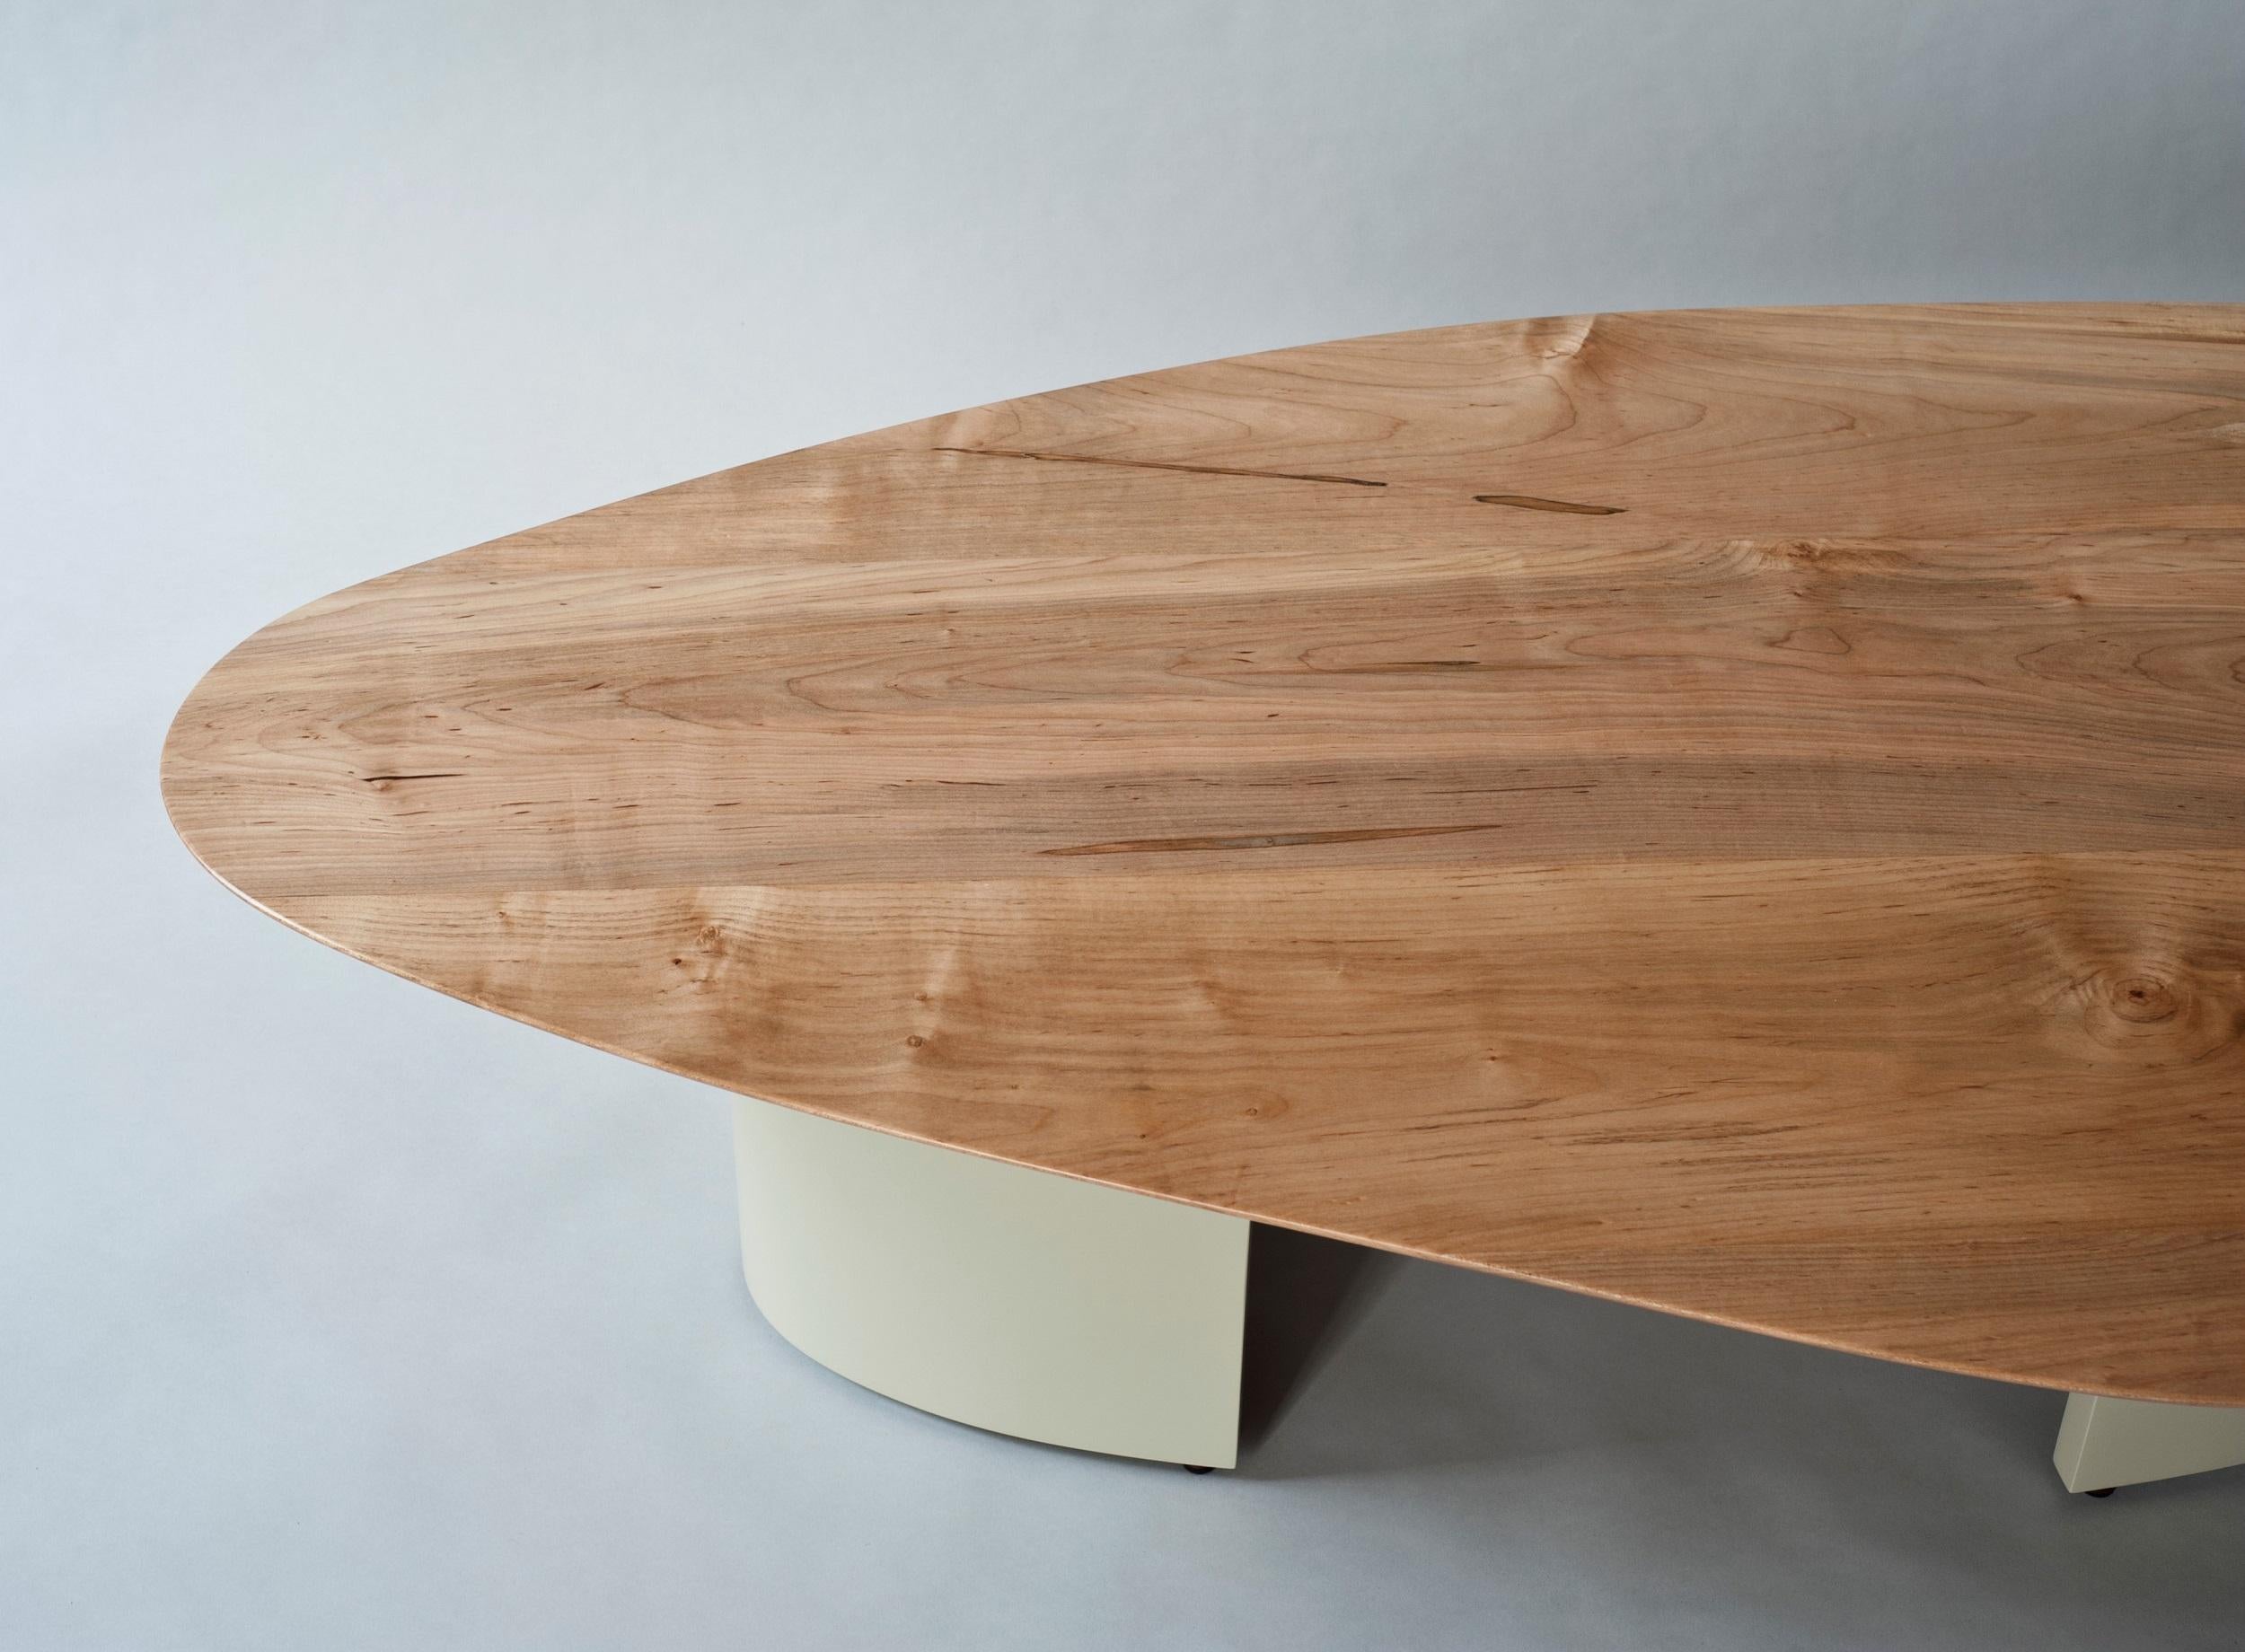 Sculptural solid maple top with base in pebble grey lacquer.